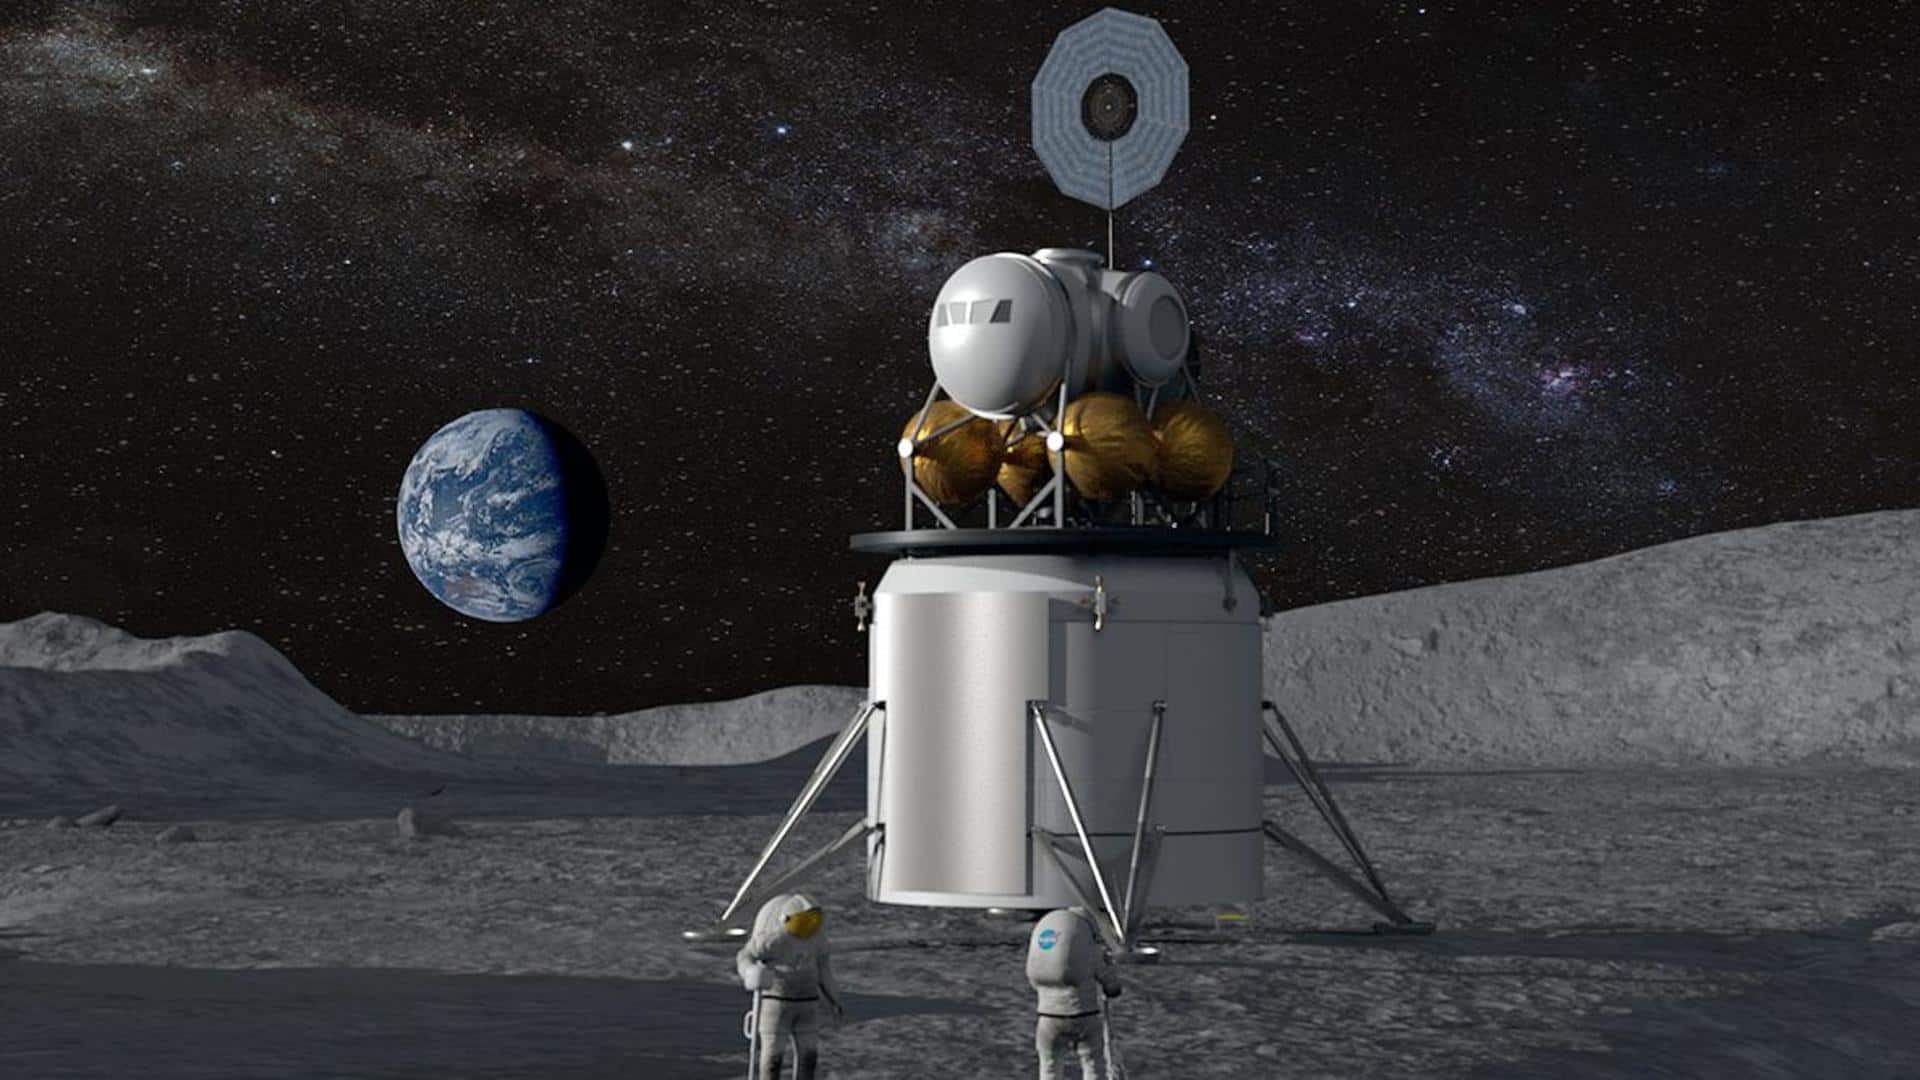 Astronauts could work on Moon by 2030, says NASA